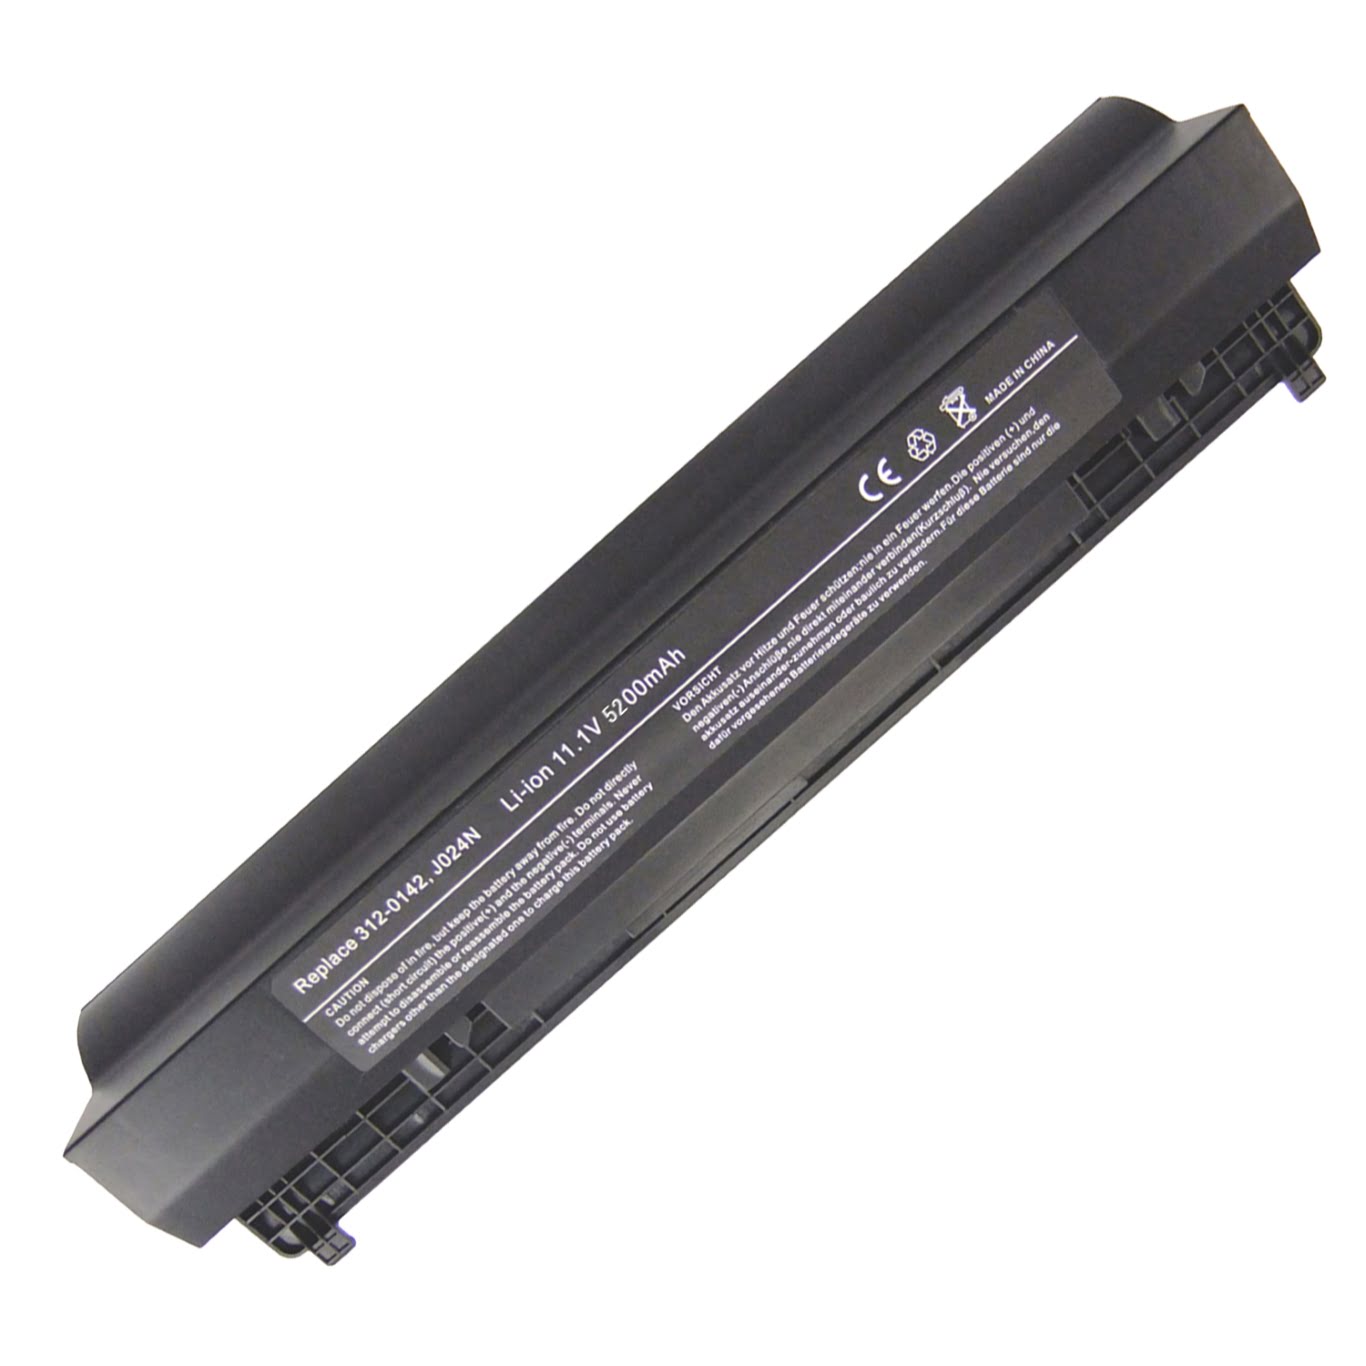 00R271, 01P255 replacement Laptop Battery for Dell Latitude 2100, Latitude 2110, 11.1V, 4400mAh, 6 cells